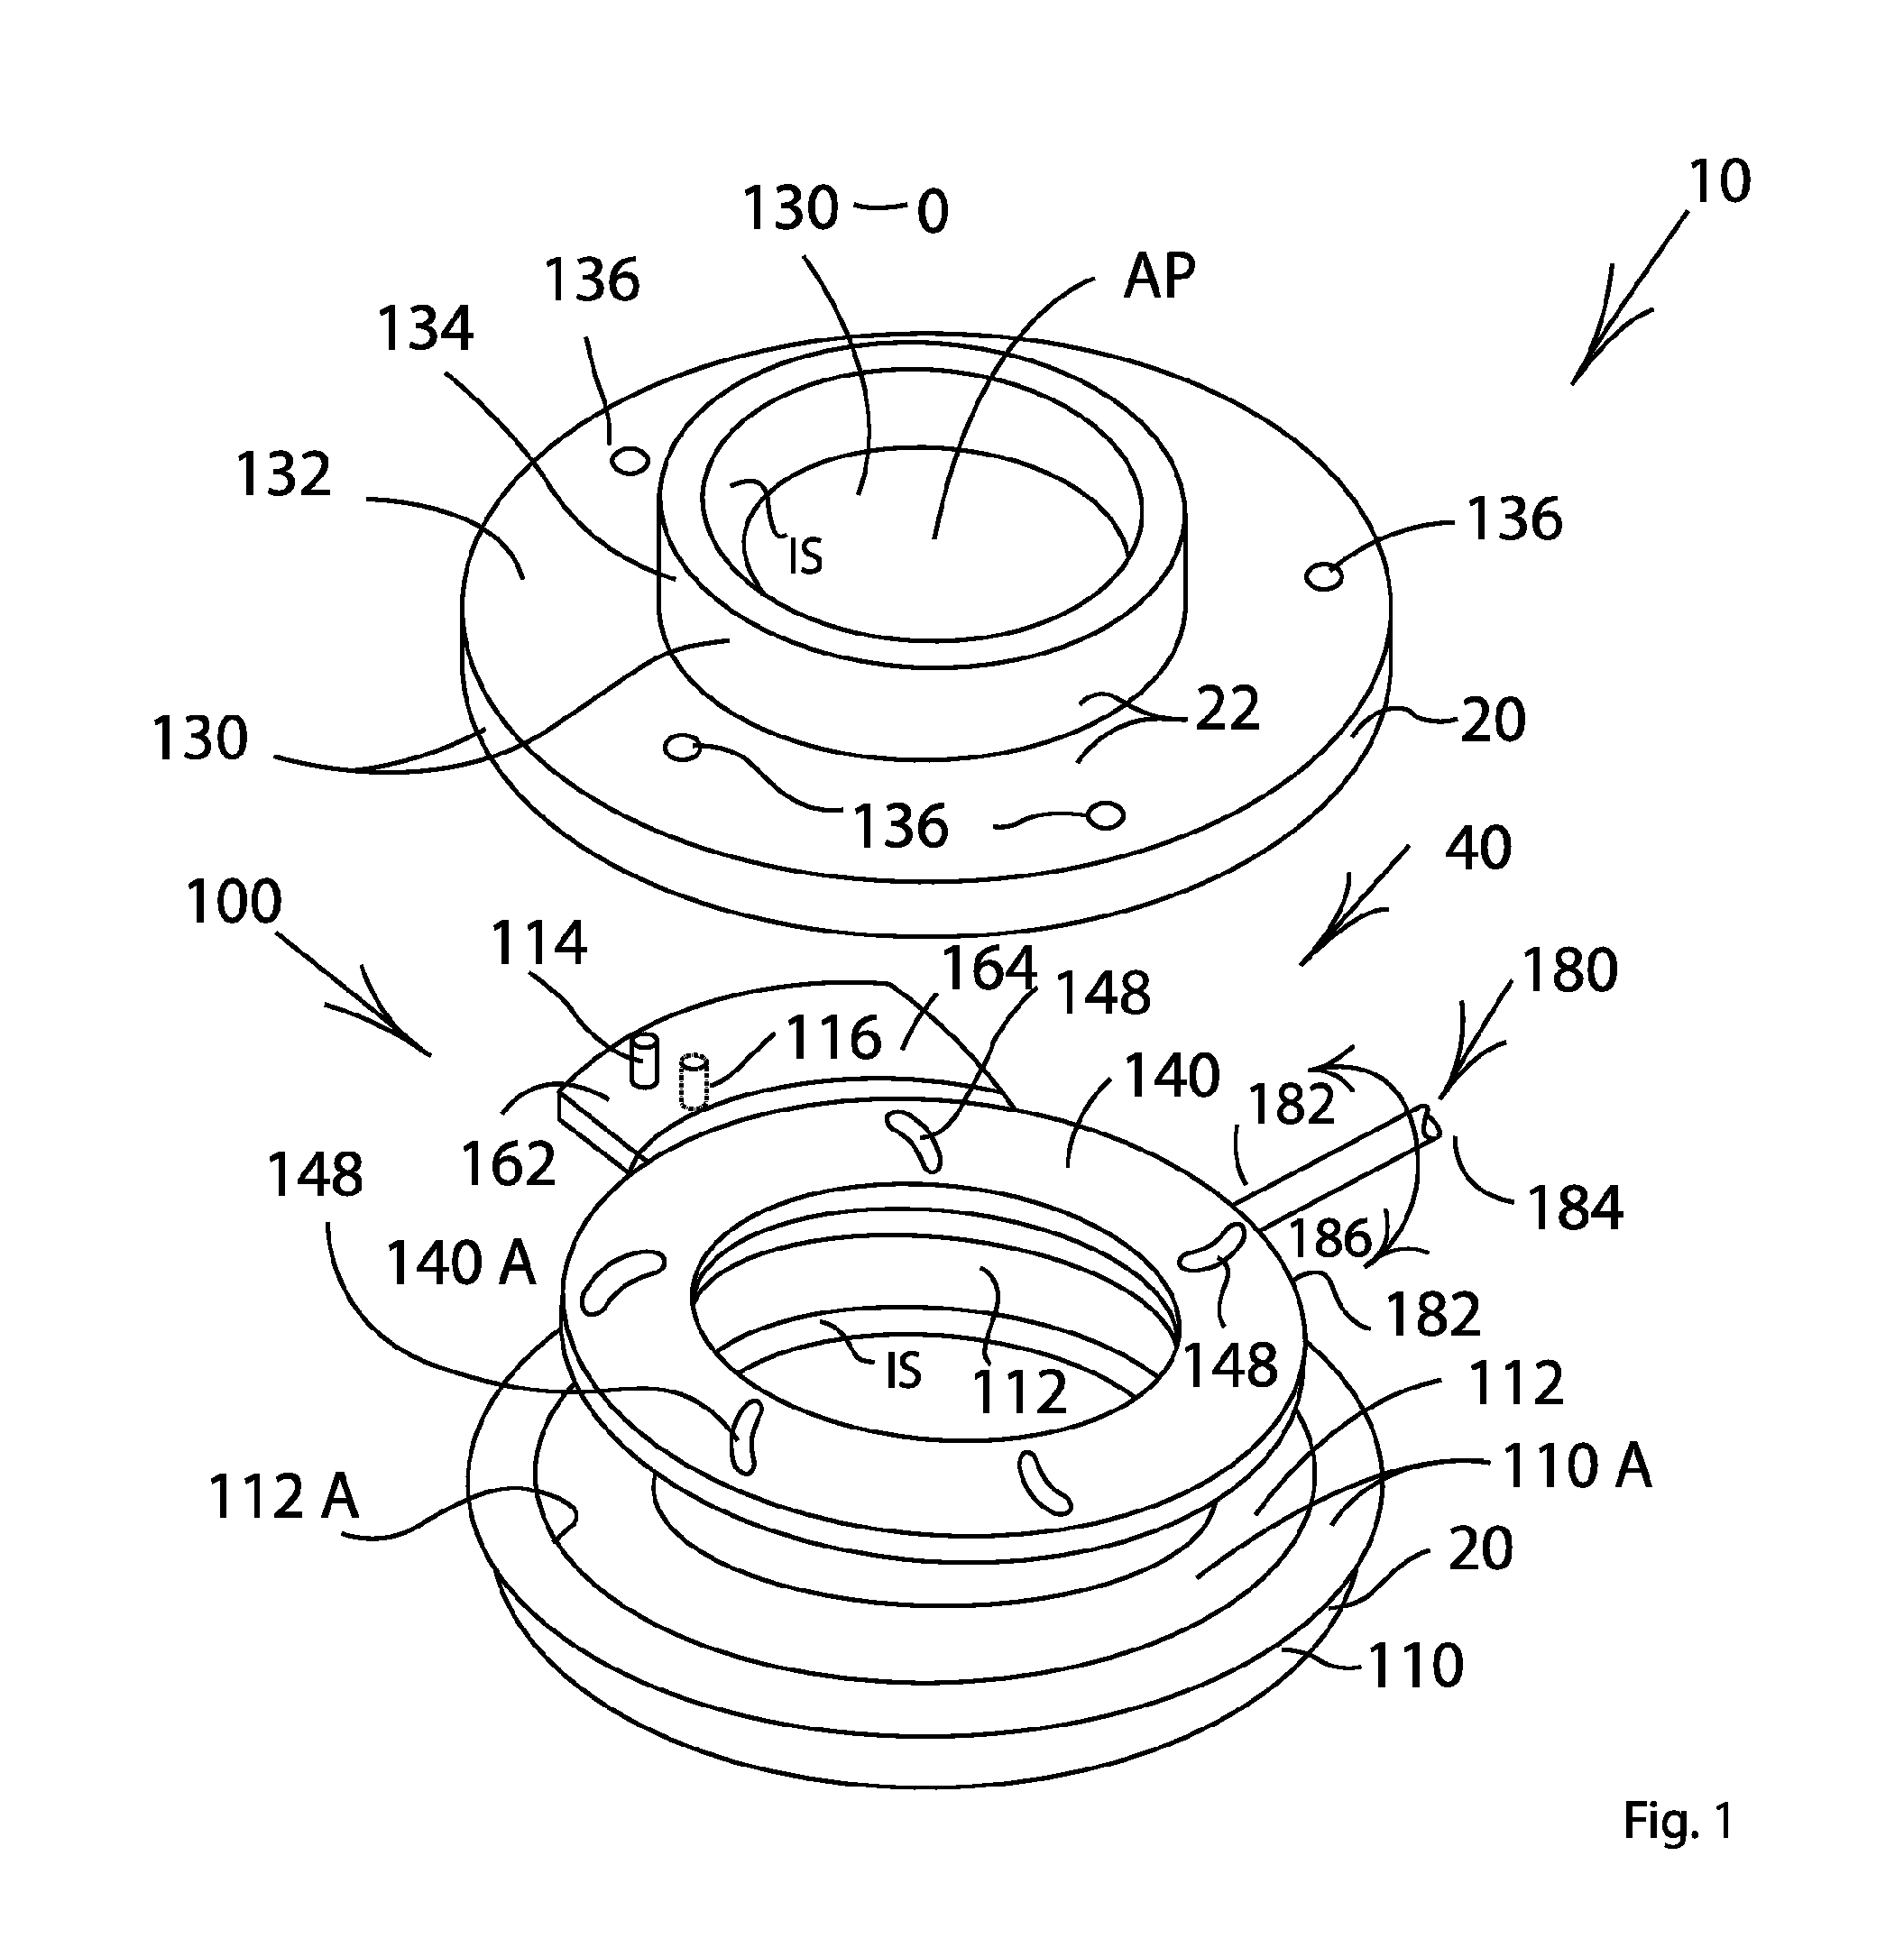 Throttle providing unobstructed air flow path when fully open and vortex generating configuration when partly open